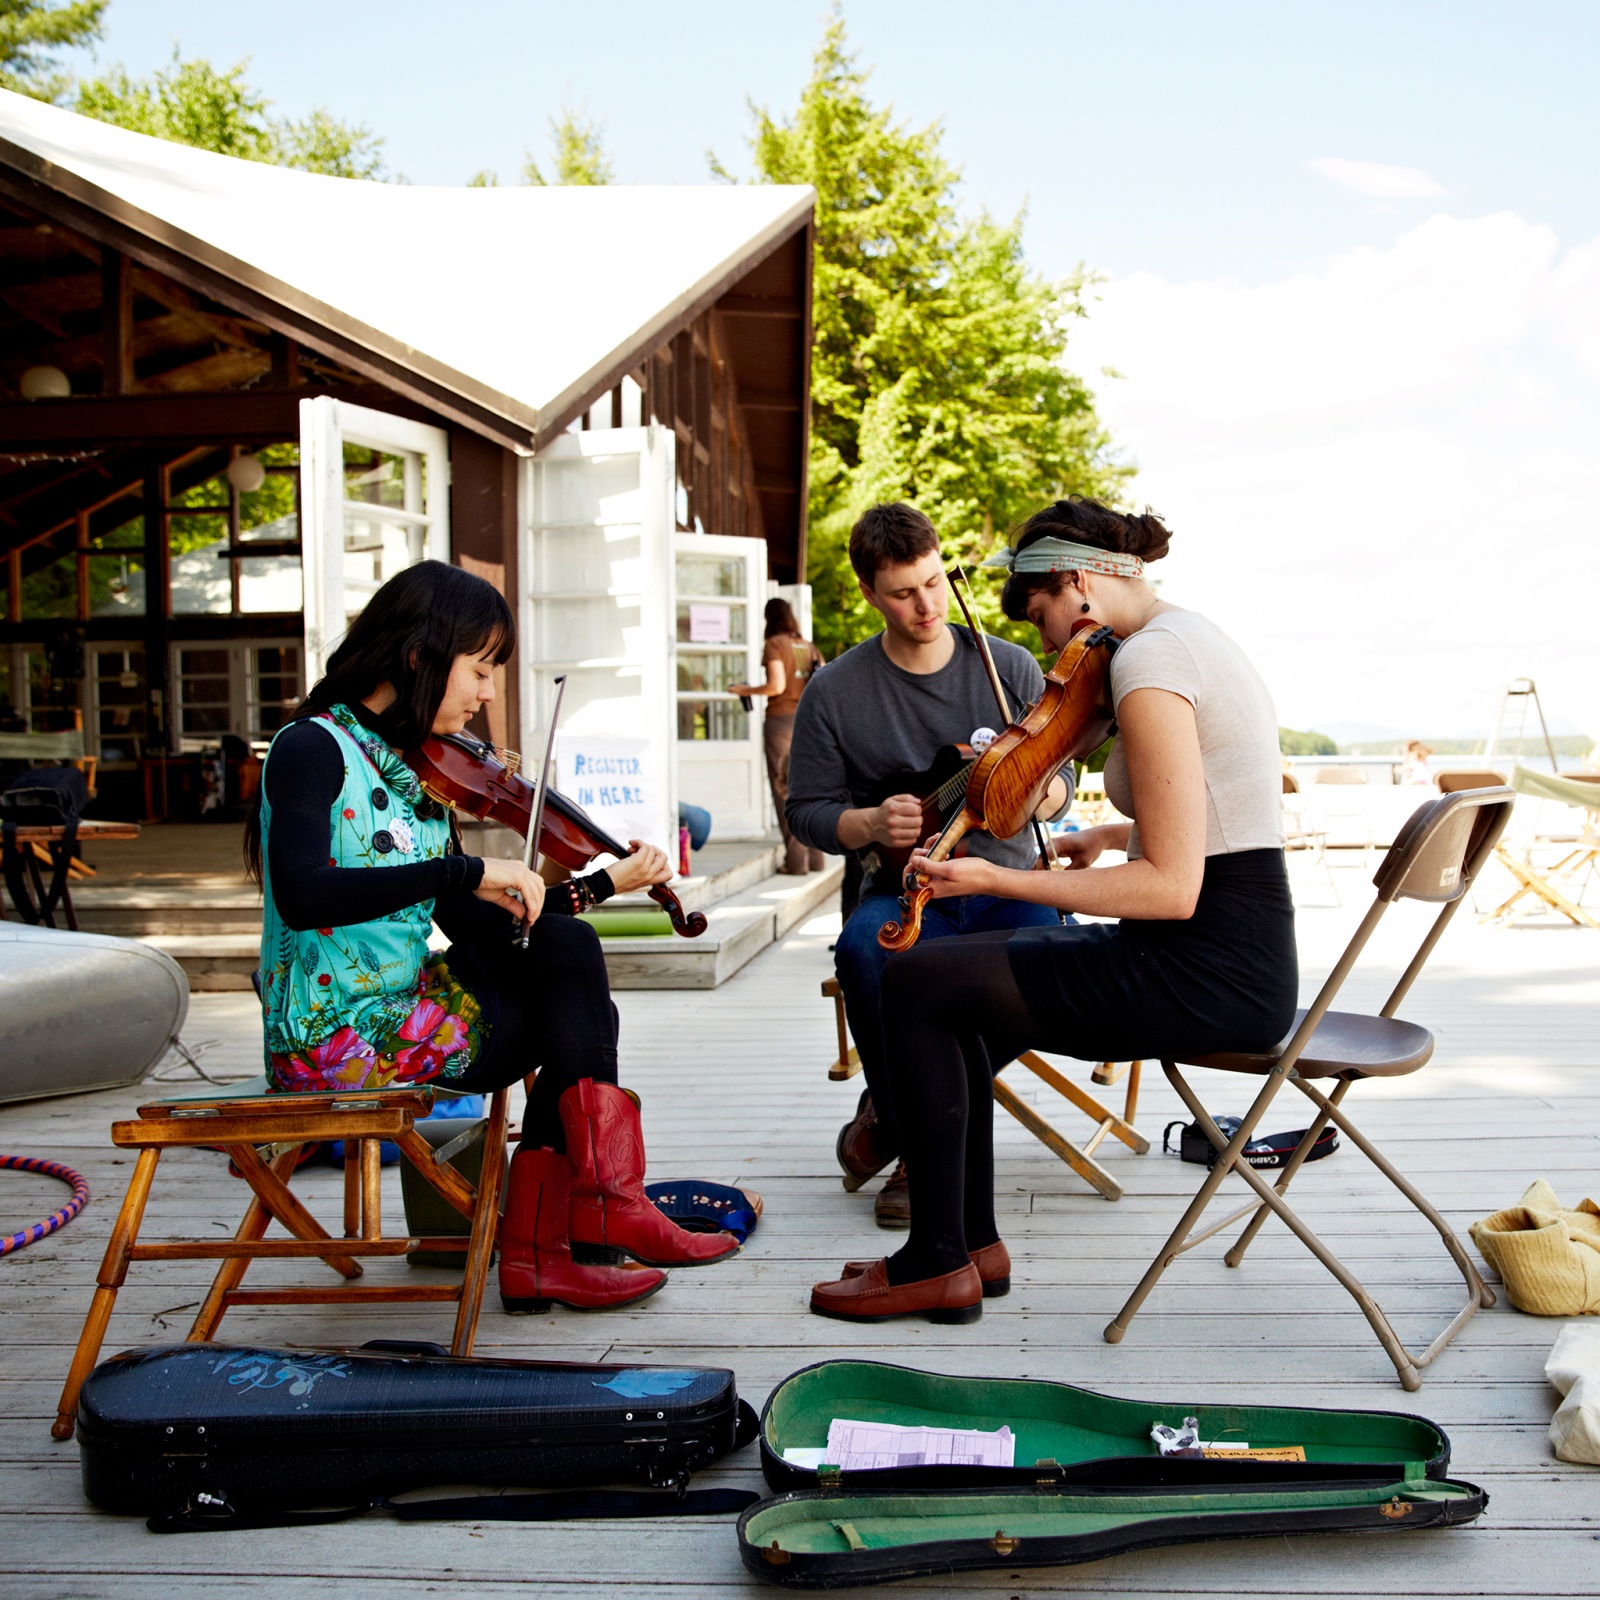 Spend the Summer at Folk Music Camp